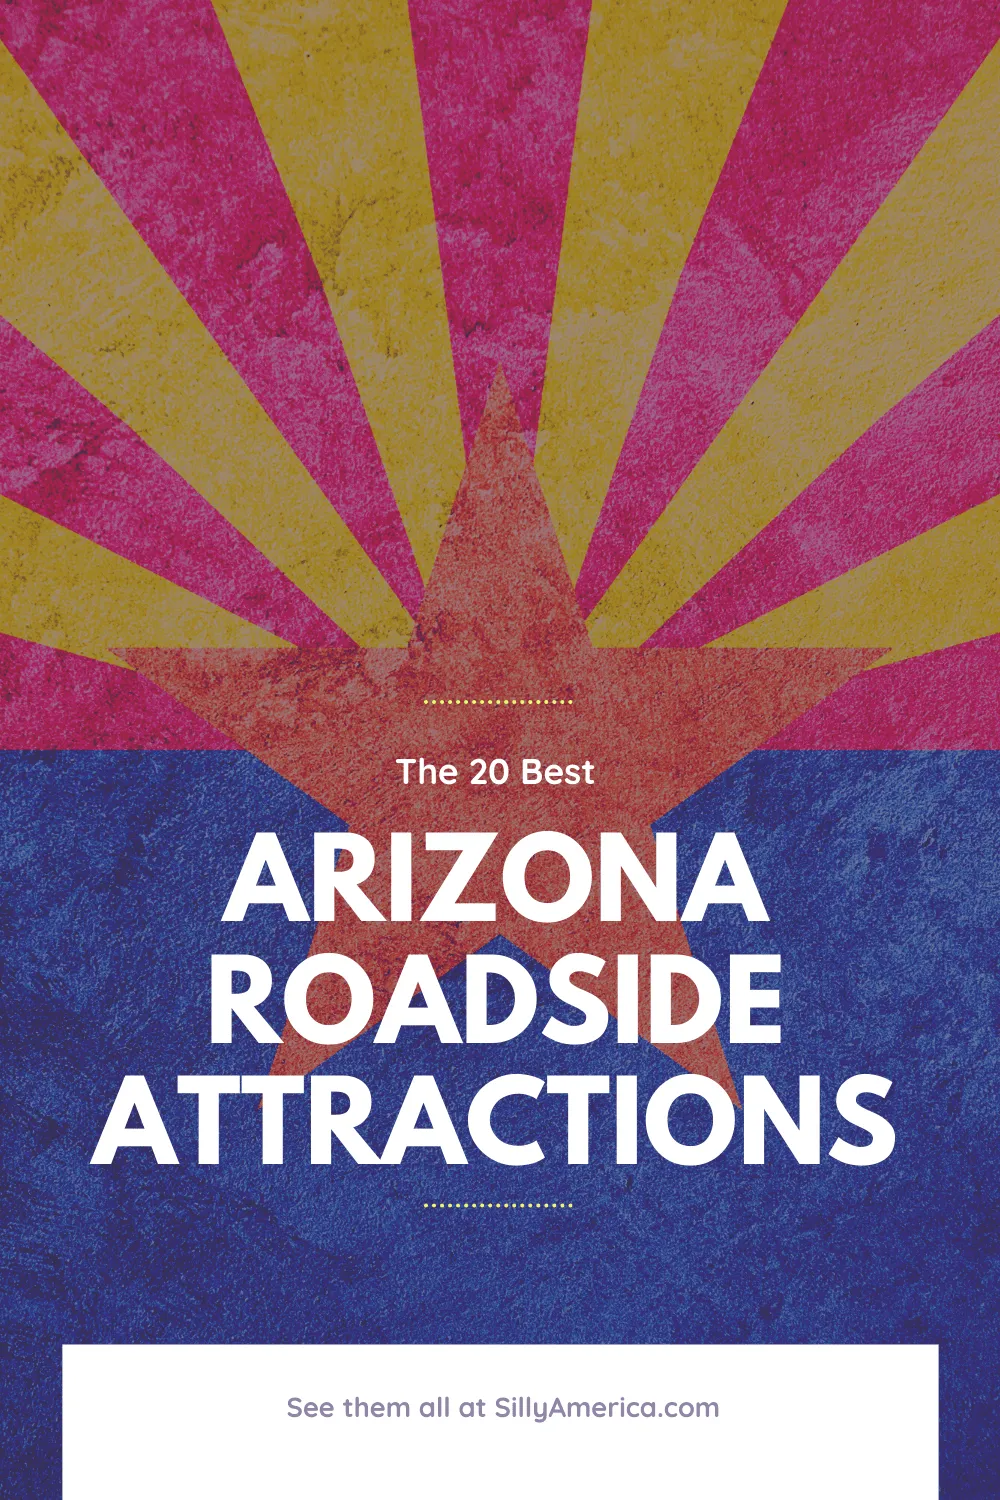 The best Arizona roadside attractions to visit on an Arizona road trip. Add these roadside oddities to your travel bucket list, itinerary, or route map! From Route 66 and beyond, these weird roadside attractions are fun road trip stops for kids or adults! #Arizona #ArizonaRoadsideAttractions #ArizonaMap #ArizonaRoadTripItinerary #ArizonaItinerary #ArizonaBucketLists #ArizonaRoadTripPhotography #PlacesToGoInArizona #Route66Arizona #ArizonaRoadTripWithKids #WeirdRoadsideAttractions